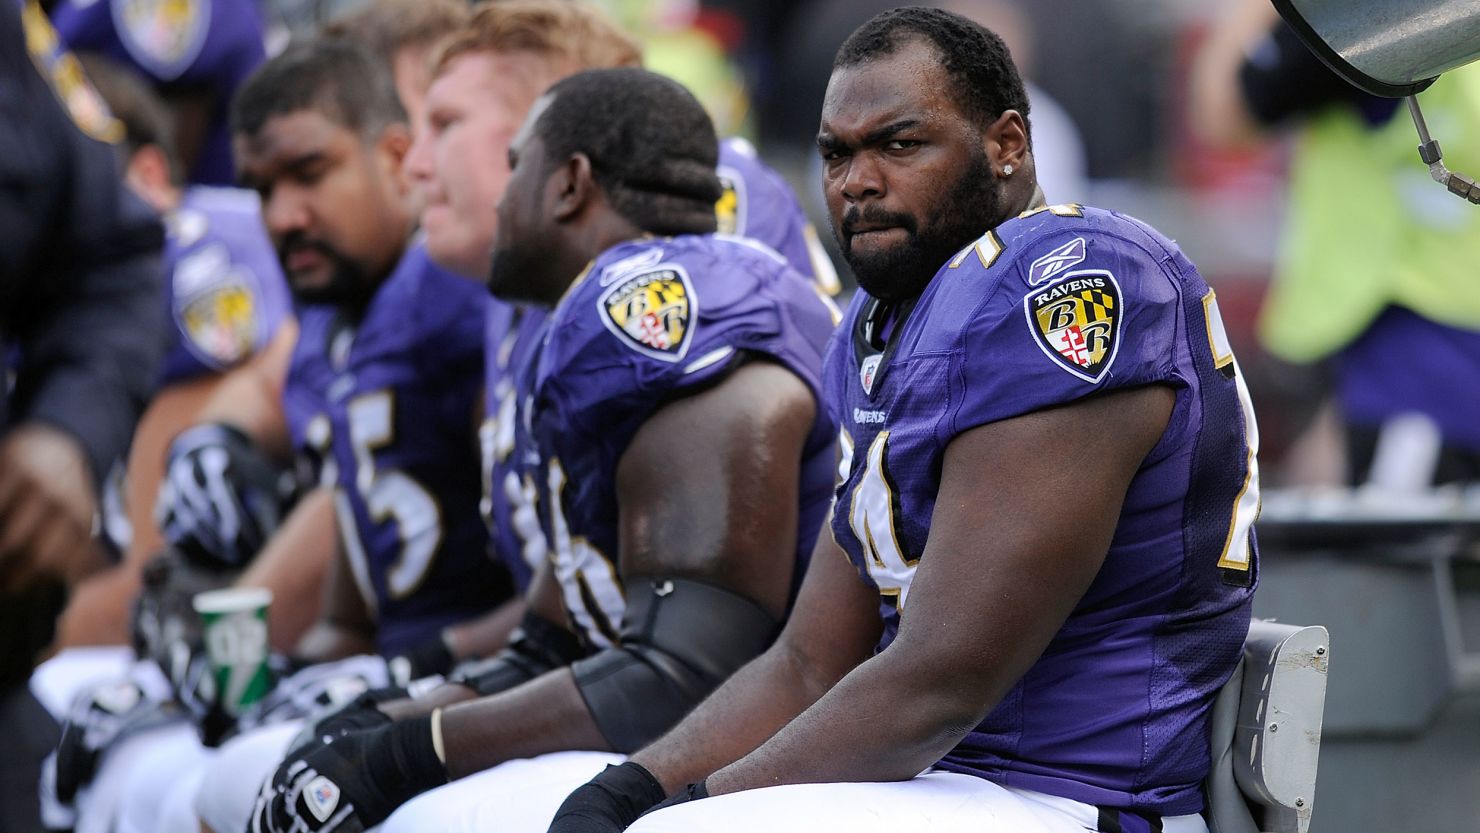 The Baltimore Ravens selected Michael Oher in the first round of the 2009 NFL Draft. The offensive tackle was named the runner-up in AP Offensive Rookie of the Year voting.